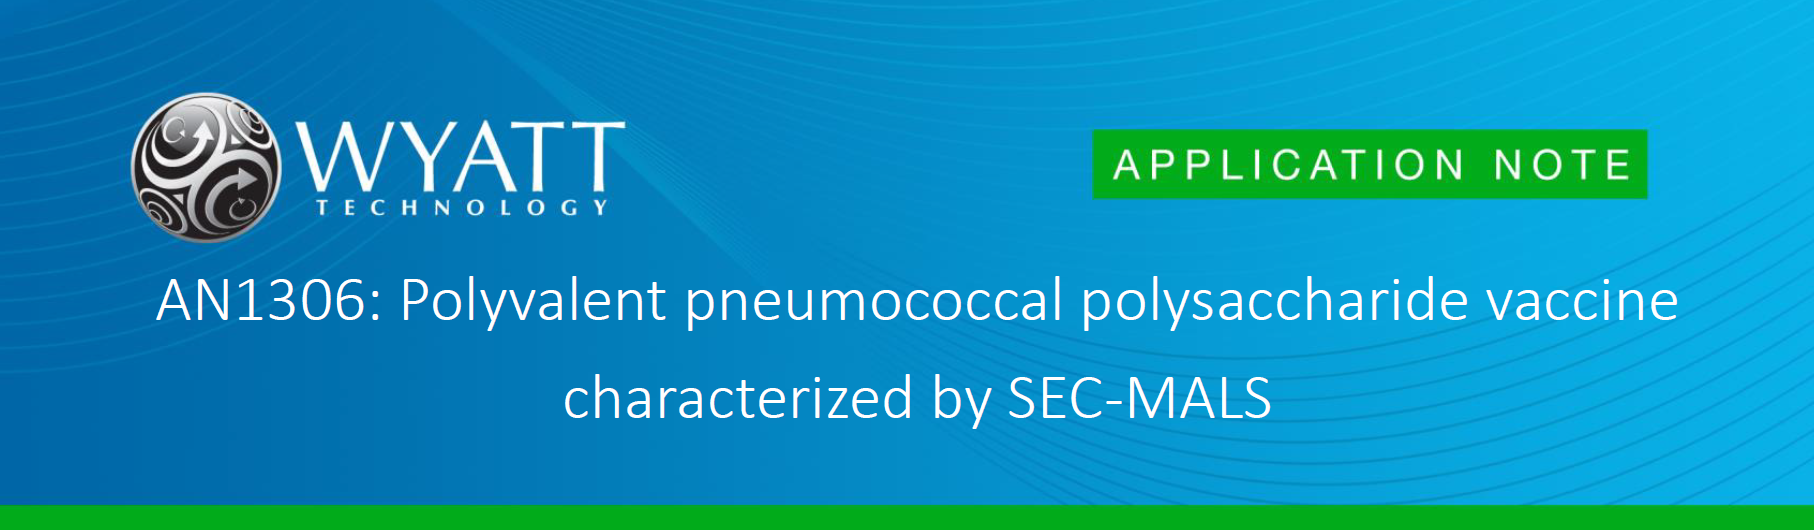 AN1306-Polyvalent-pneumococcal-polysaccharide-vaccine-by-SEC-MALS_#1.PNG